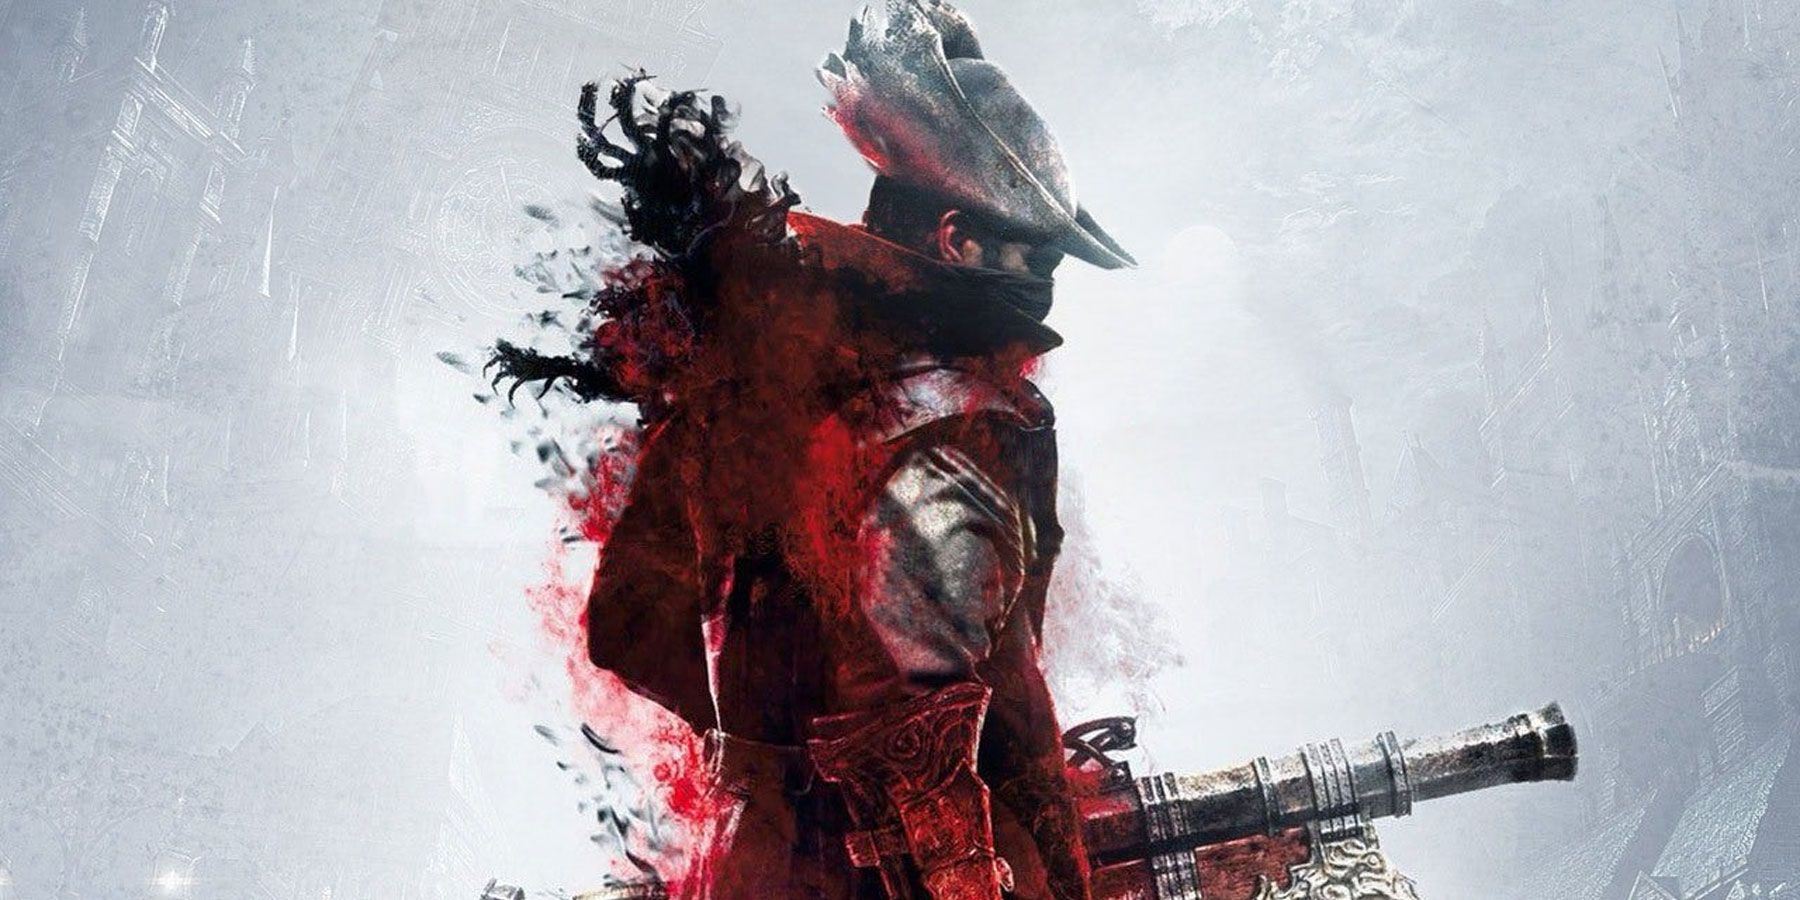 Bloodborne PC port rumours intensify ahead of State of Play